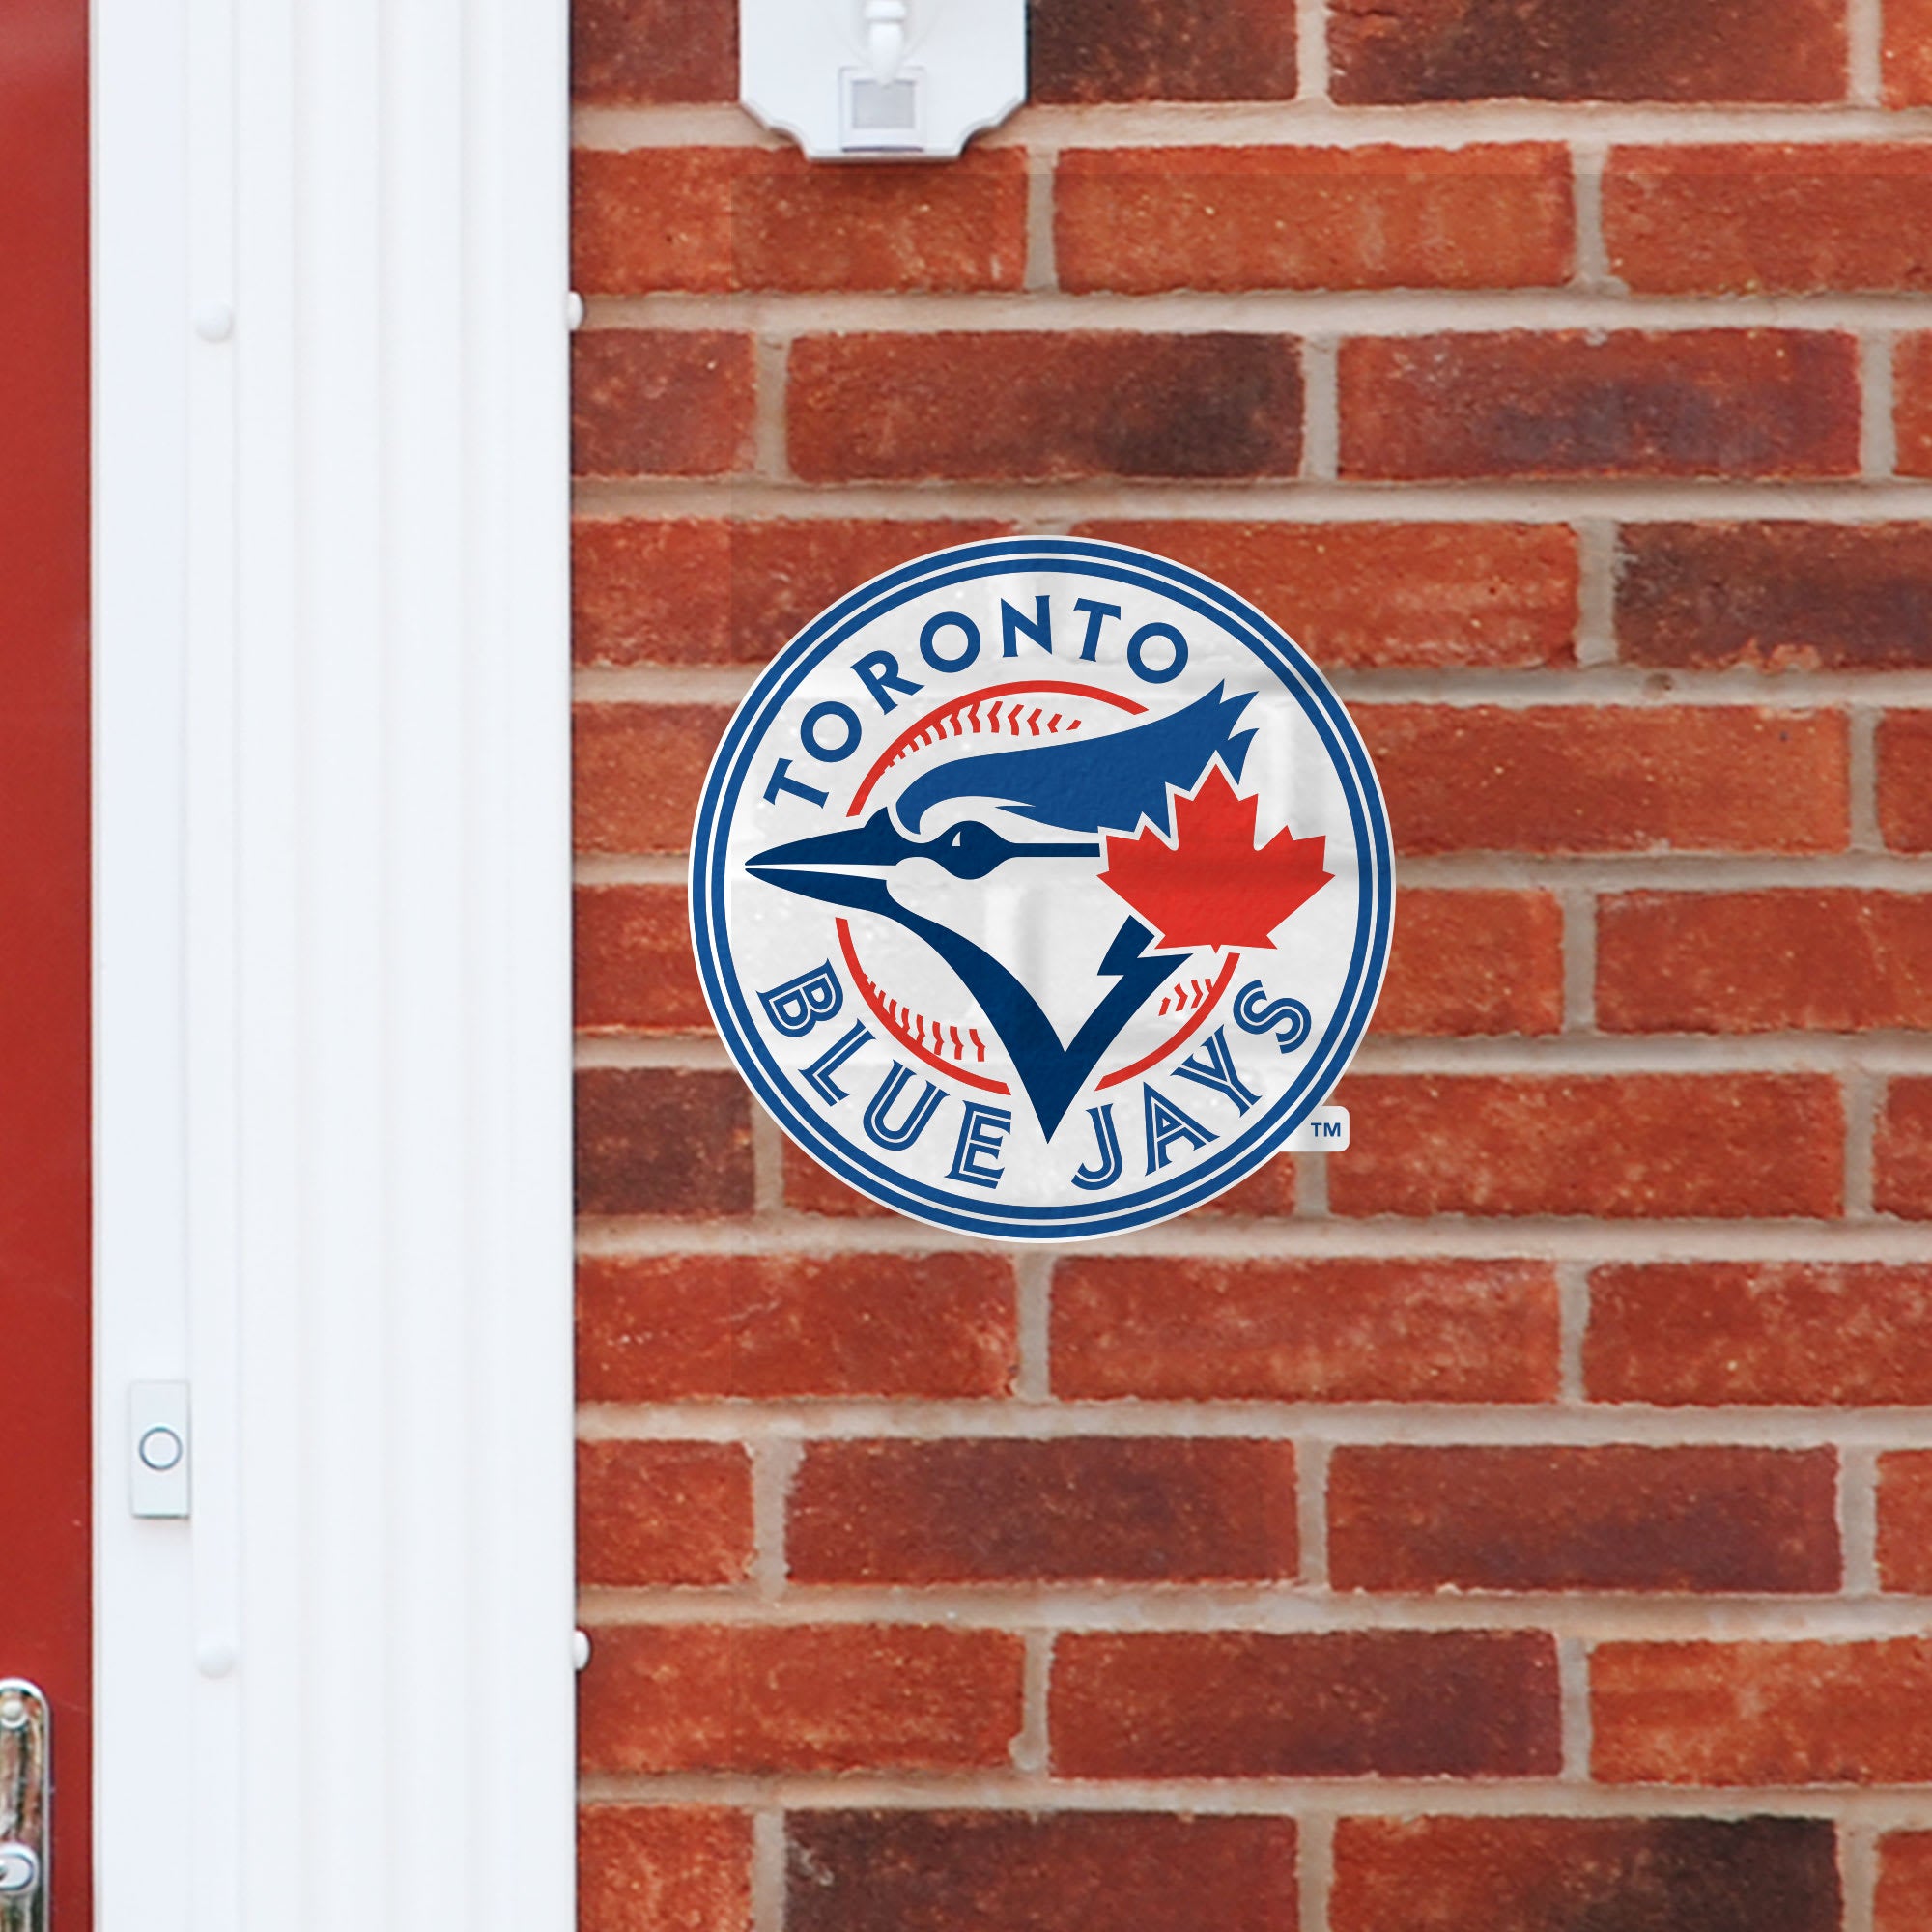 Toronto Blue Jays: Logo - Officially Licensed MLB Outdoor Graphic Large by Fathead | Wood/Aluminum